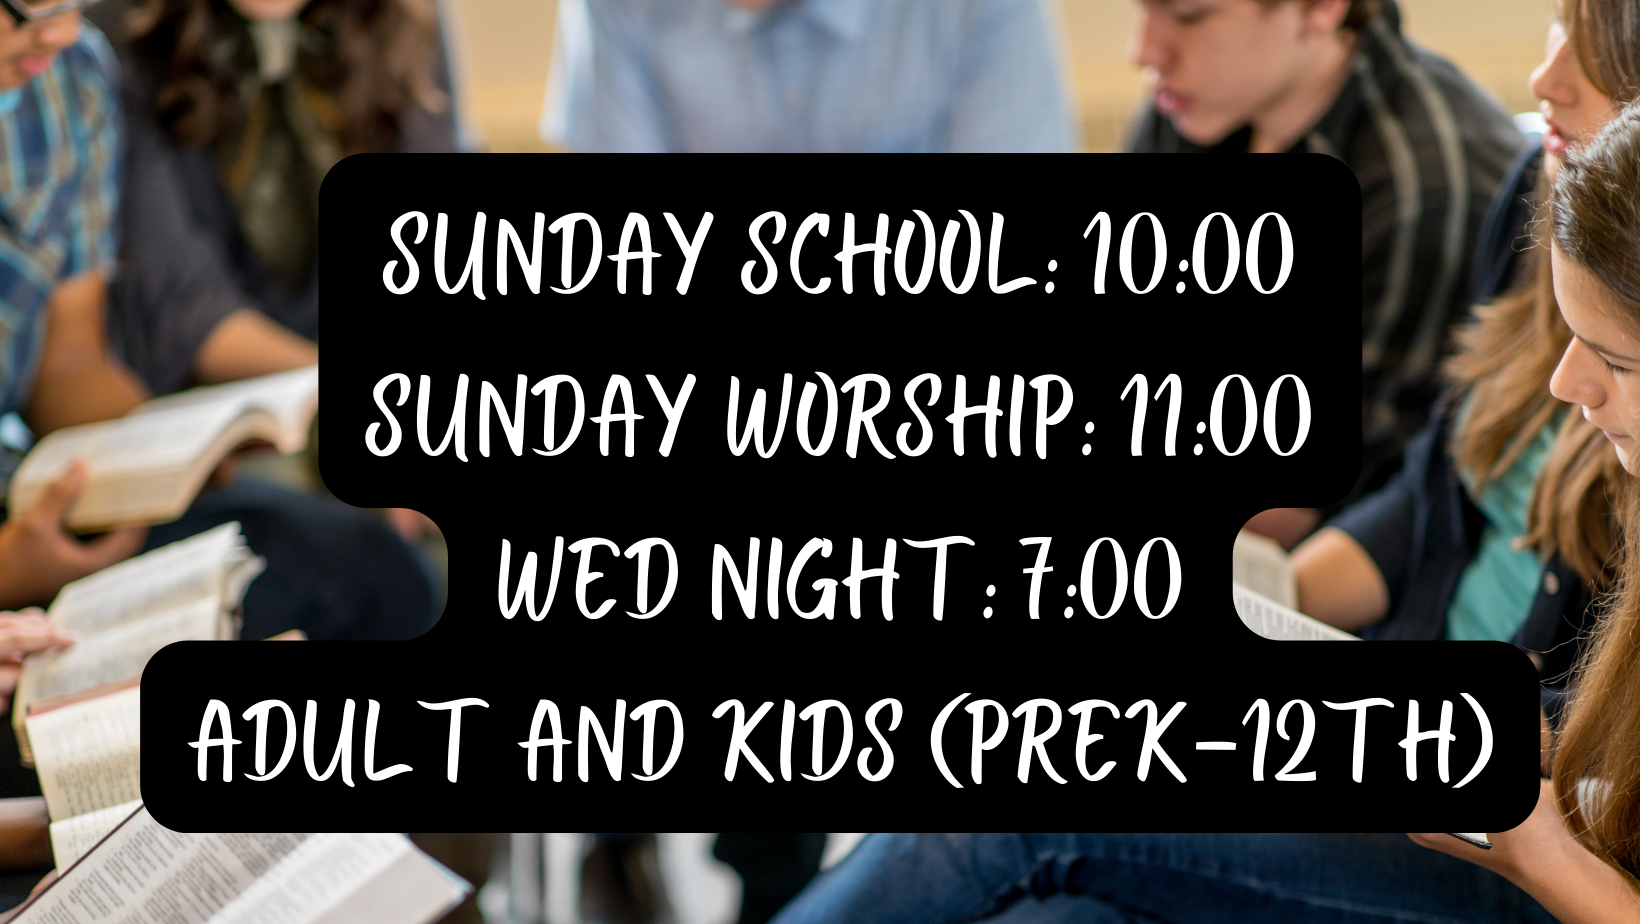 Sunday School 1000 Sunday Worship 1100 Wed Night 700 Adult and Kids (prek-12th).png